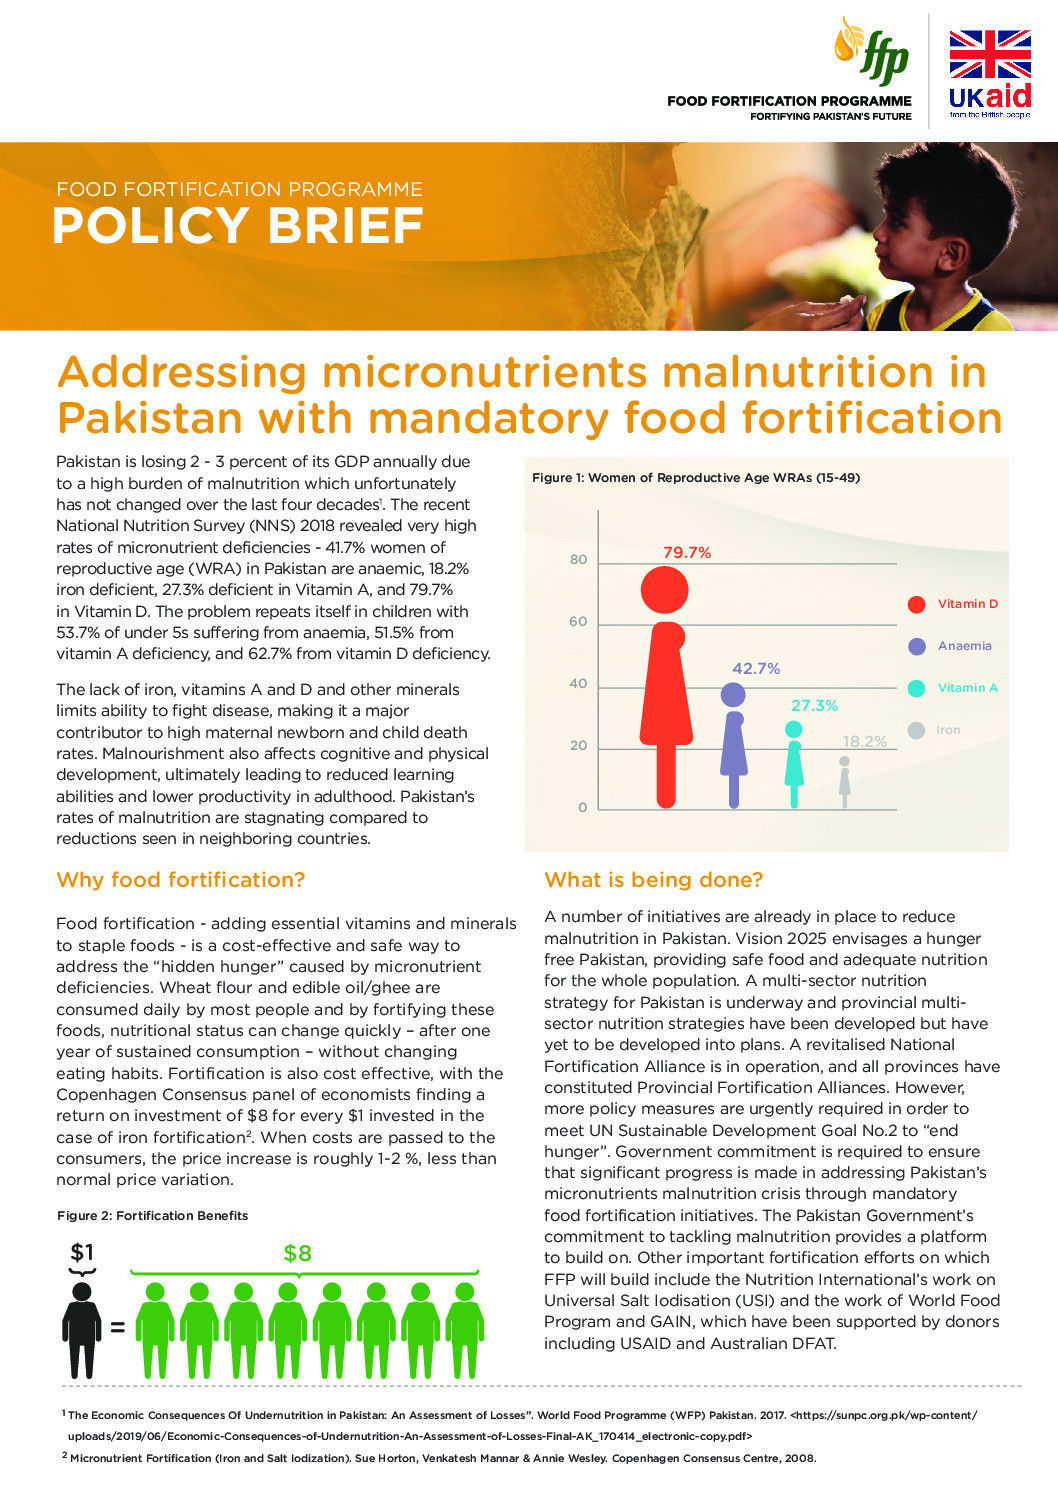 Addressing micronutrients malnutrition in Pakistan with mandatory food fortification thumbnail